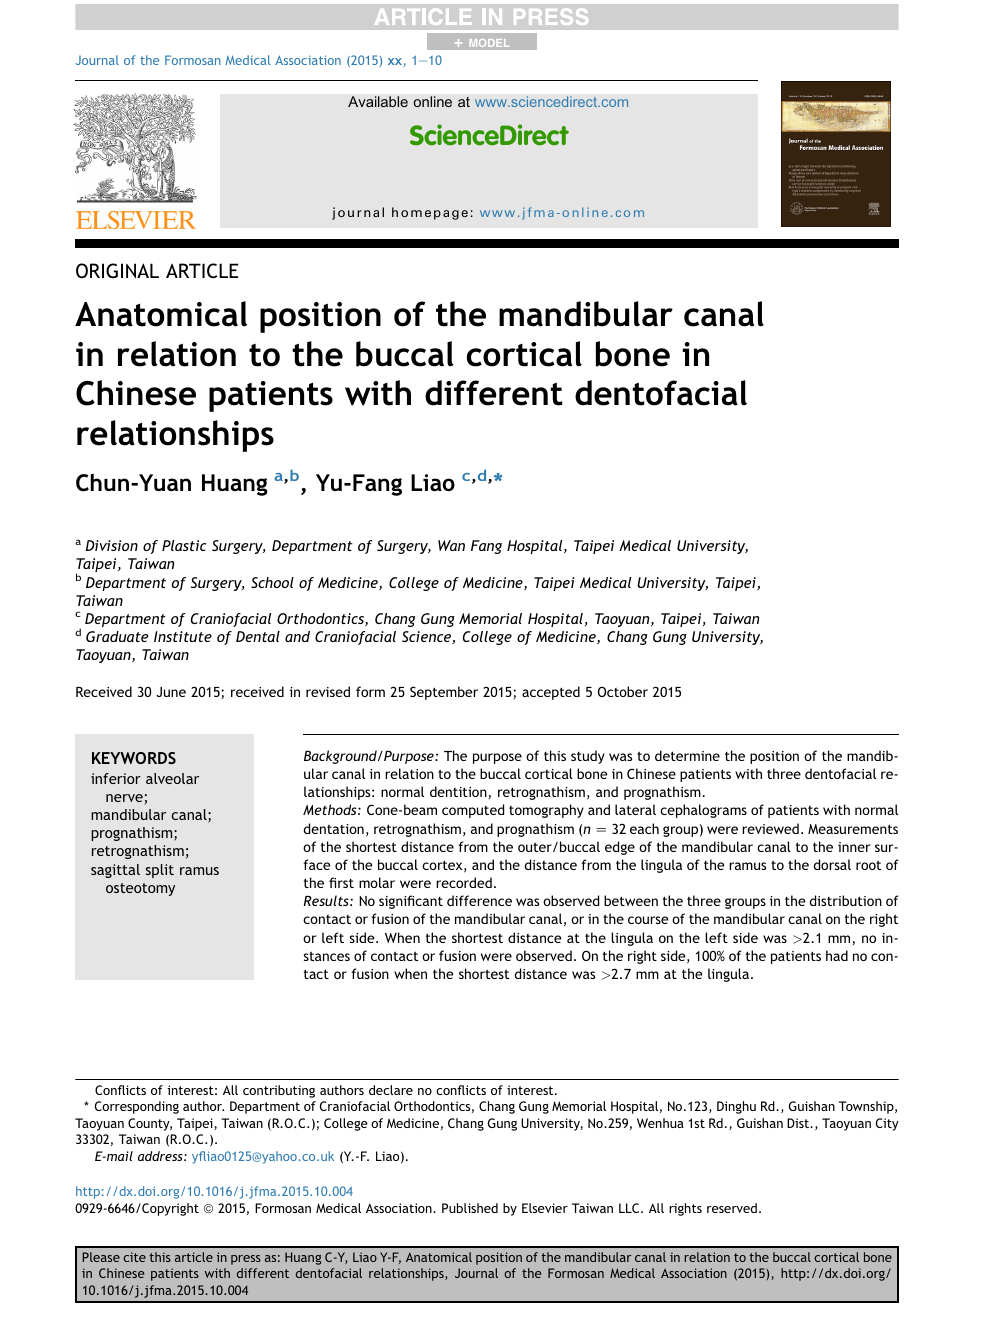 Anatomical Position Of The Mandibular Canal In Relation To The Buccal Cortical Bone In Chinese Patients With Different Dentofacial Relationships Topic Of Research Paper In Clinical Medicine Download Scholarly Article Pdf